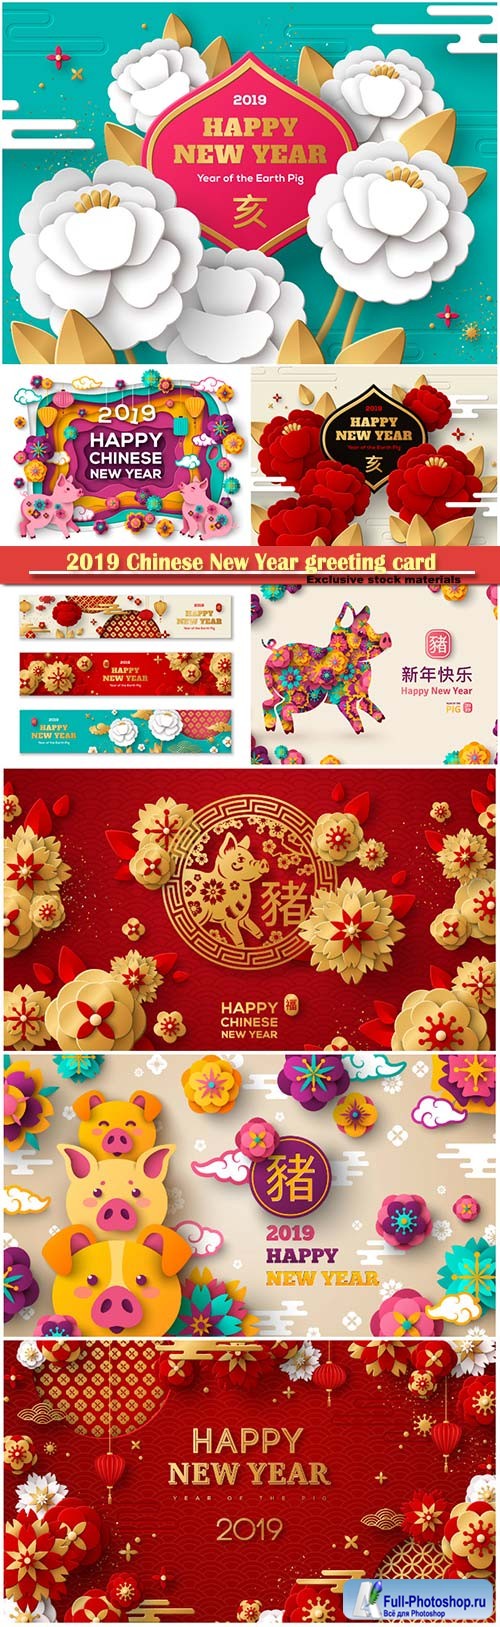 2019 Chinese New Year greeting card, happy New Year illustration